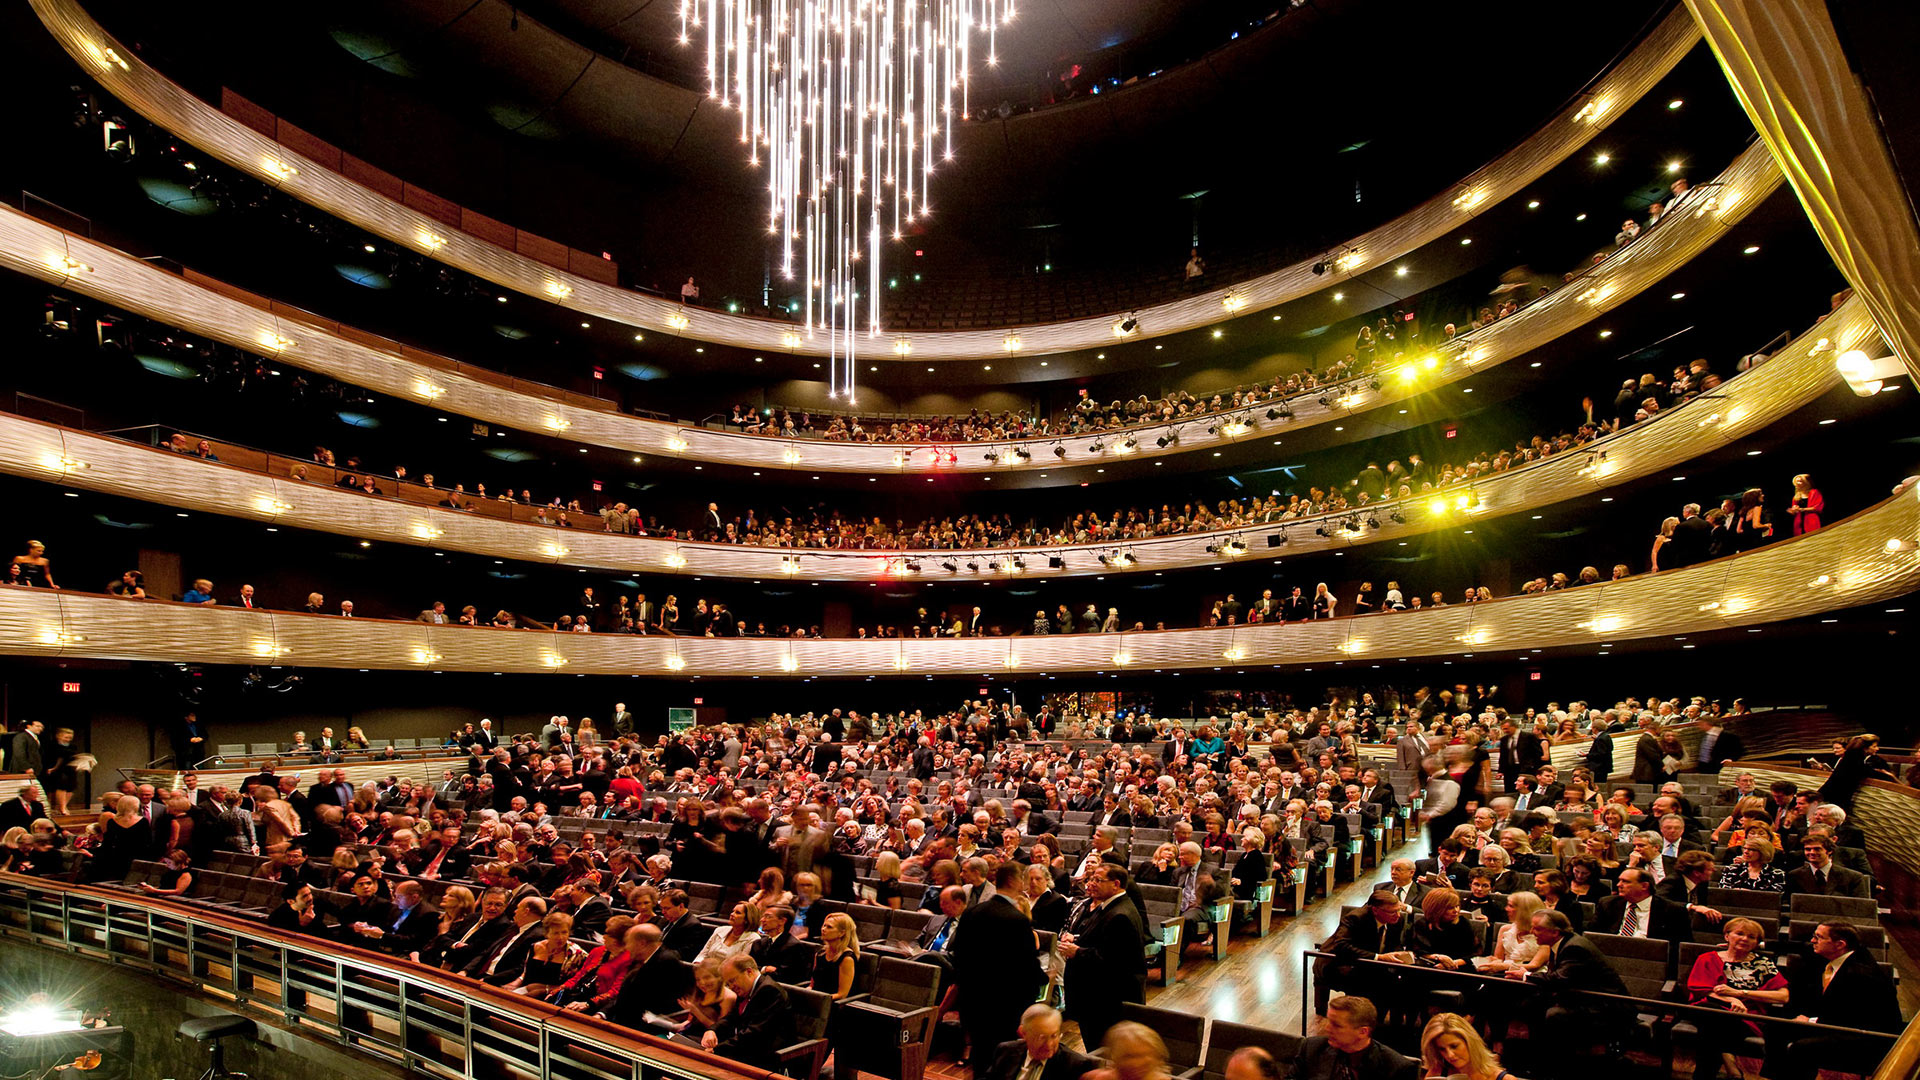 AT&T Performing Arts Center, Winspear Opera House